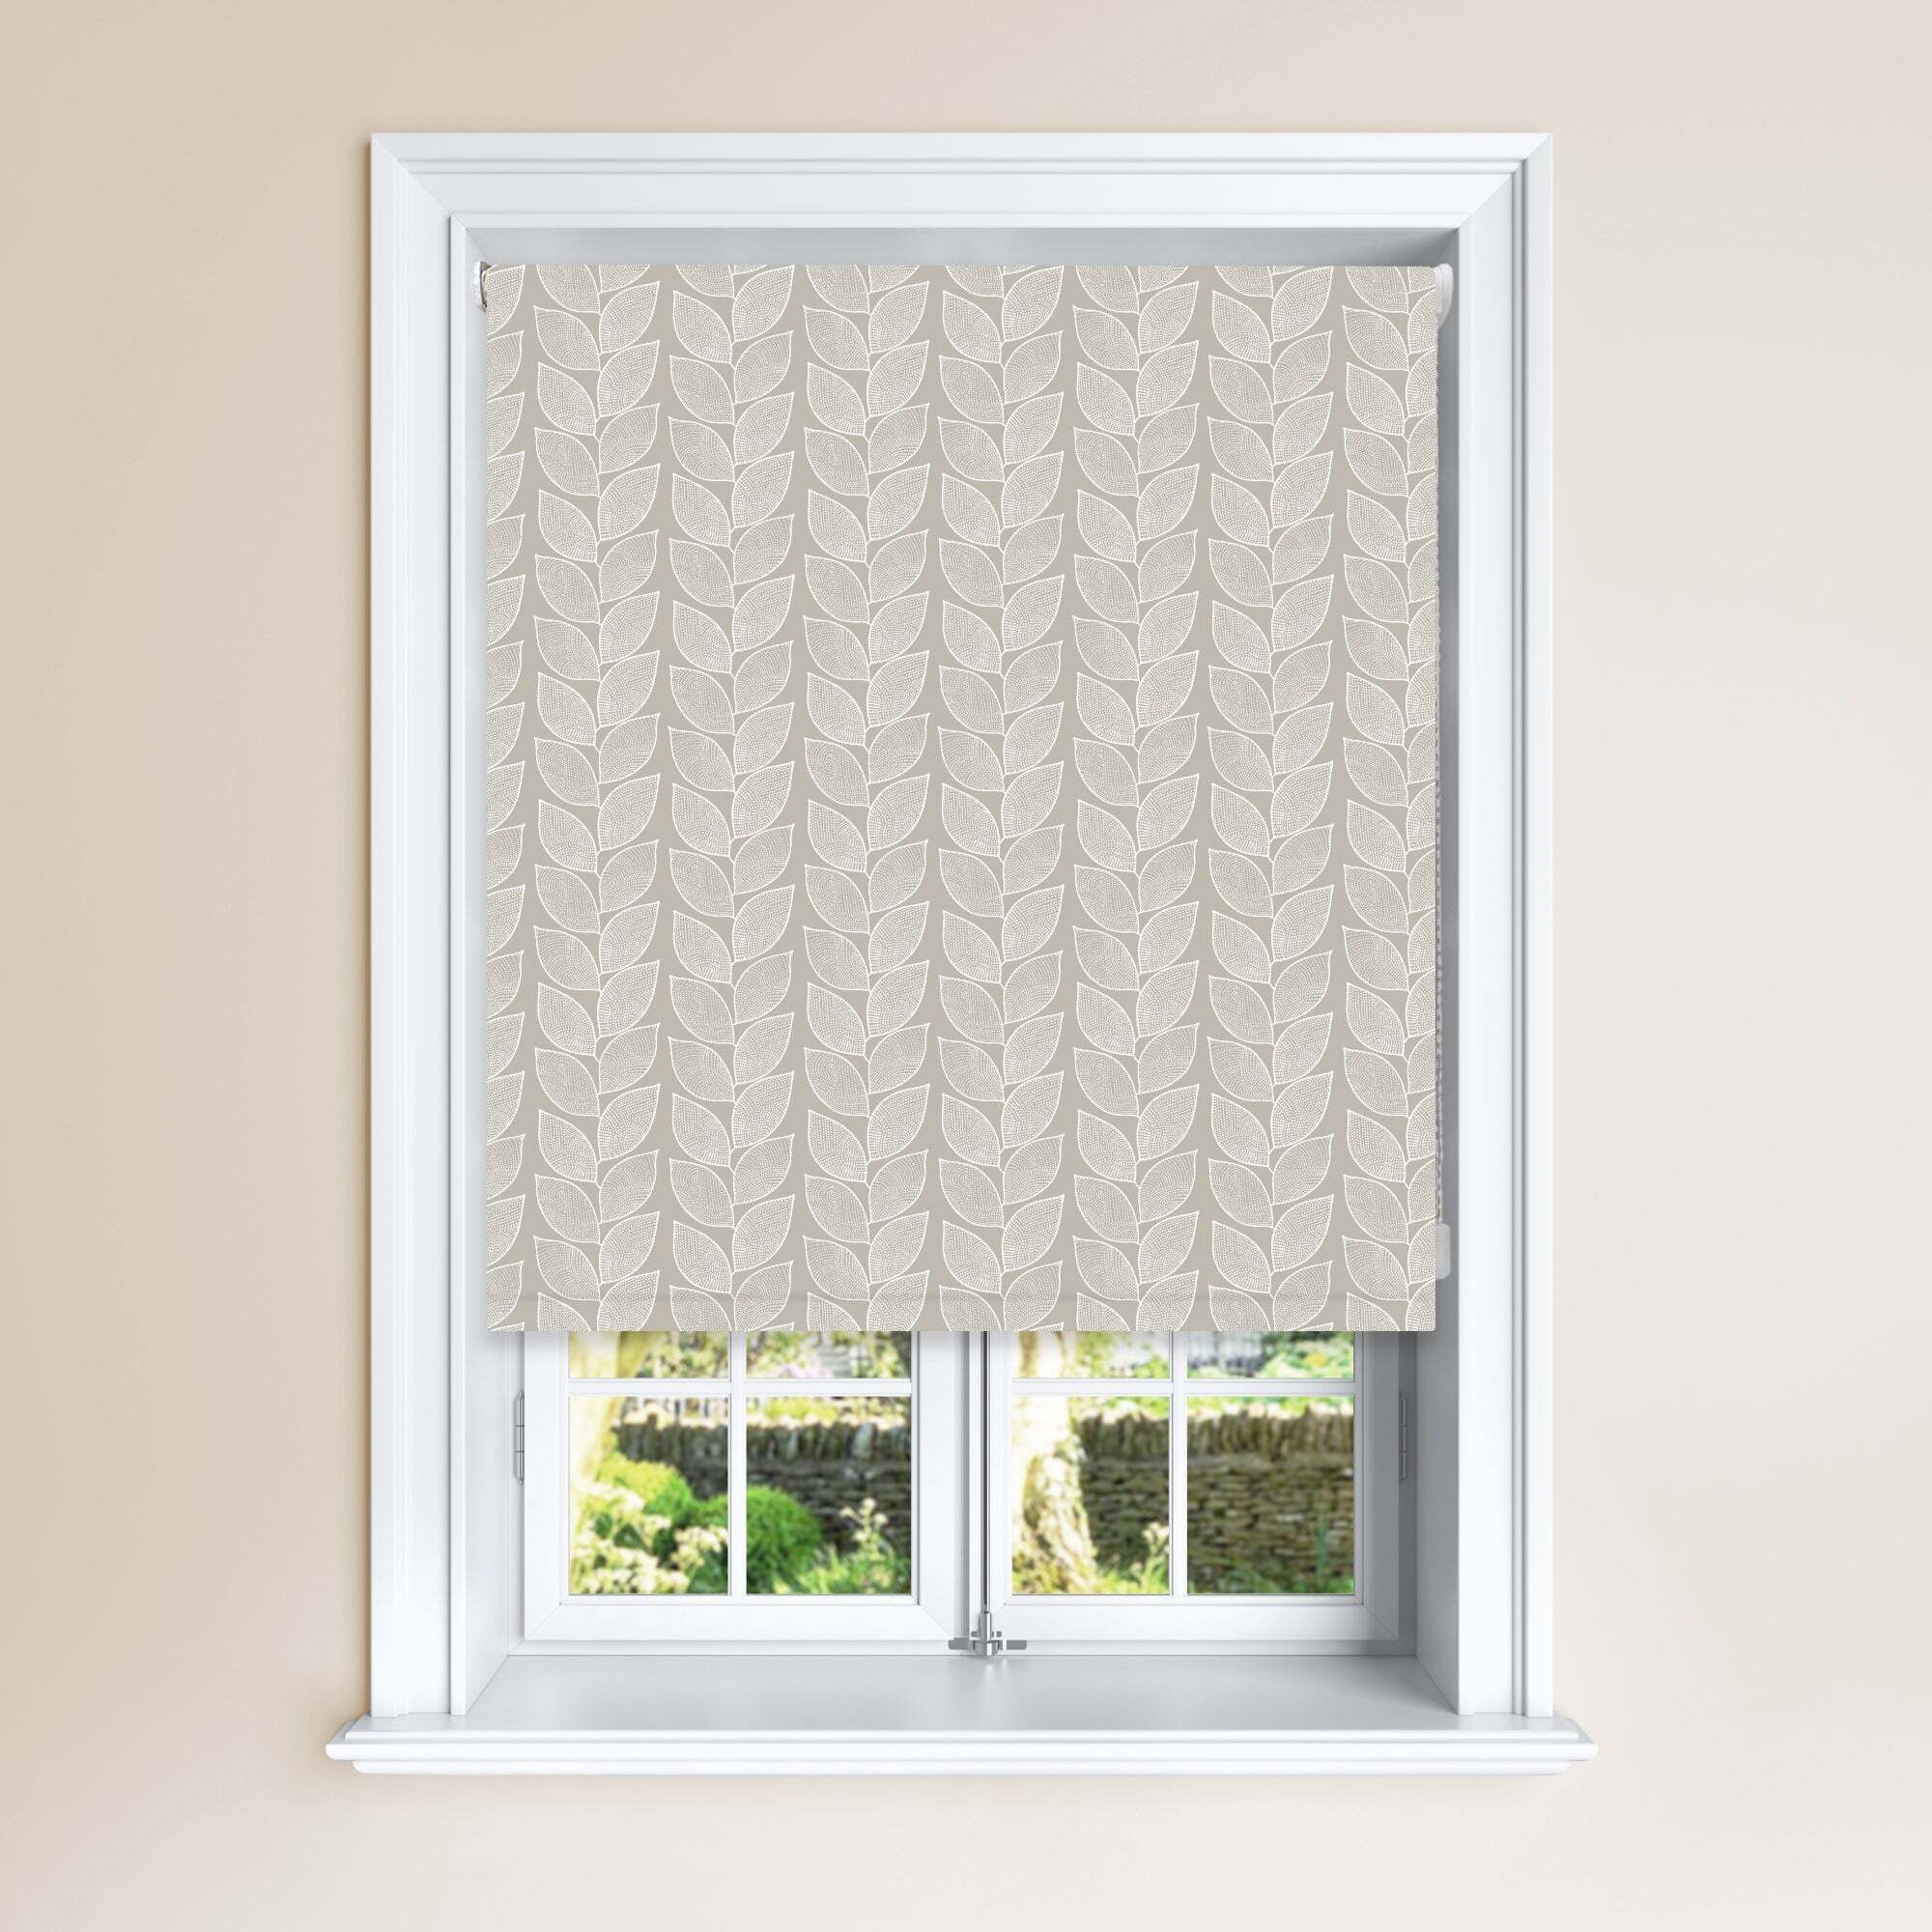 Beanstalk Calico Blackout Roller Blind Brown and White